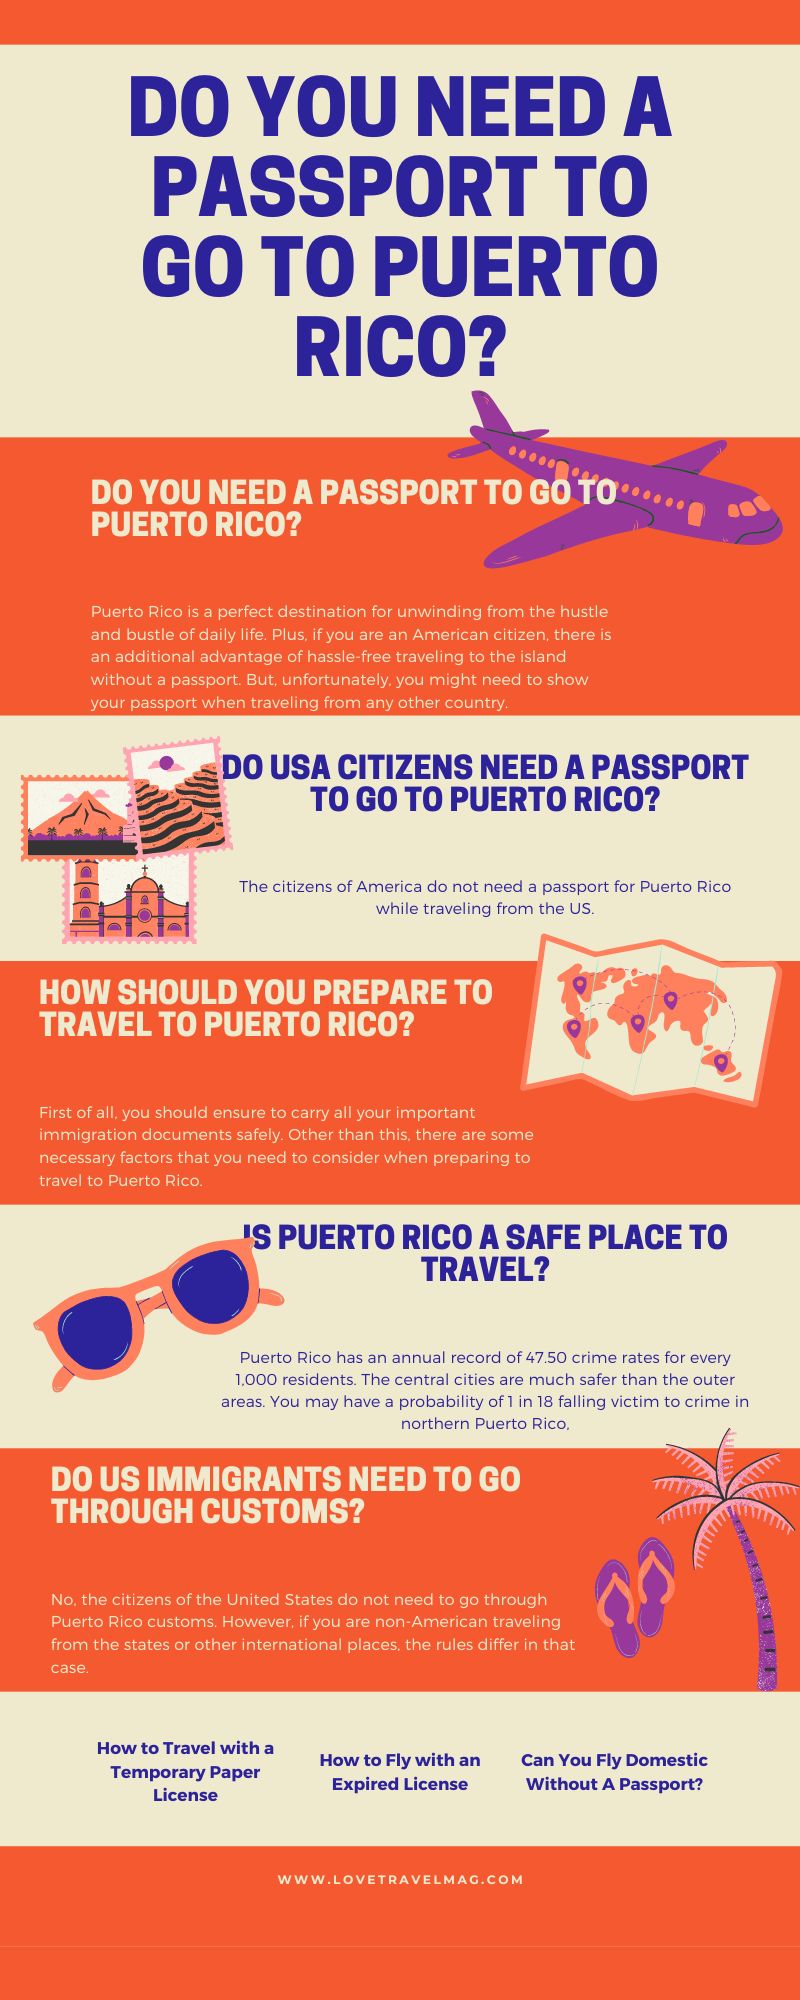 Do You Need A Passport For Puerto Rico? Love Travel Magazine